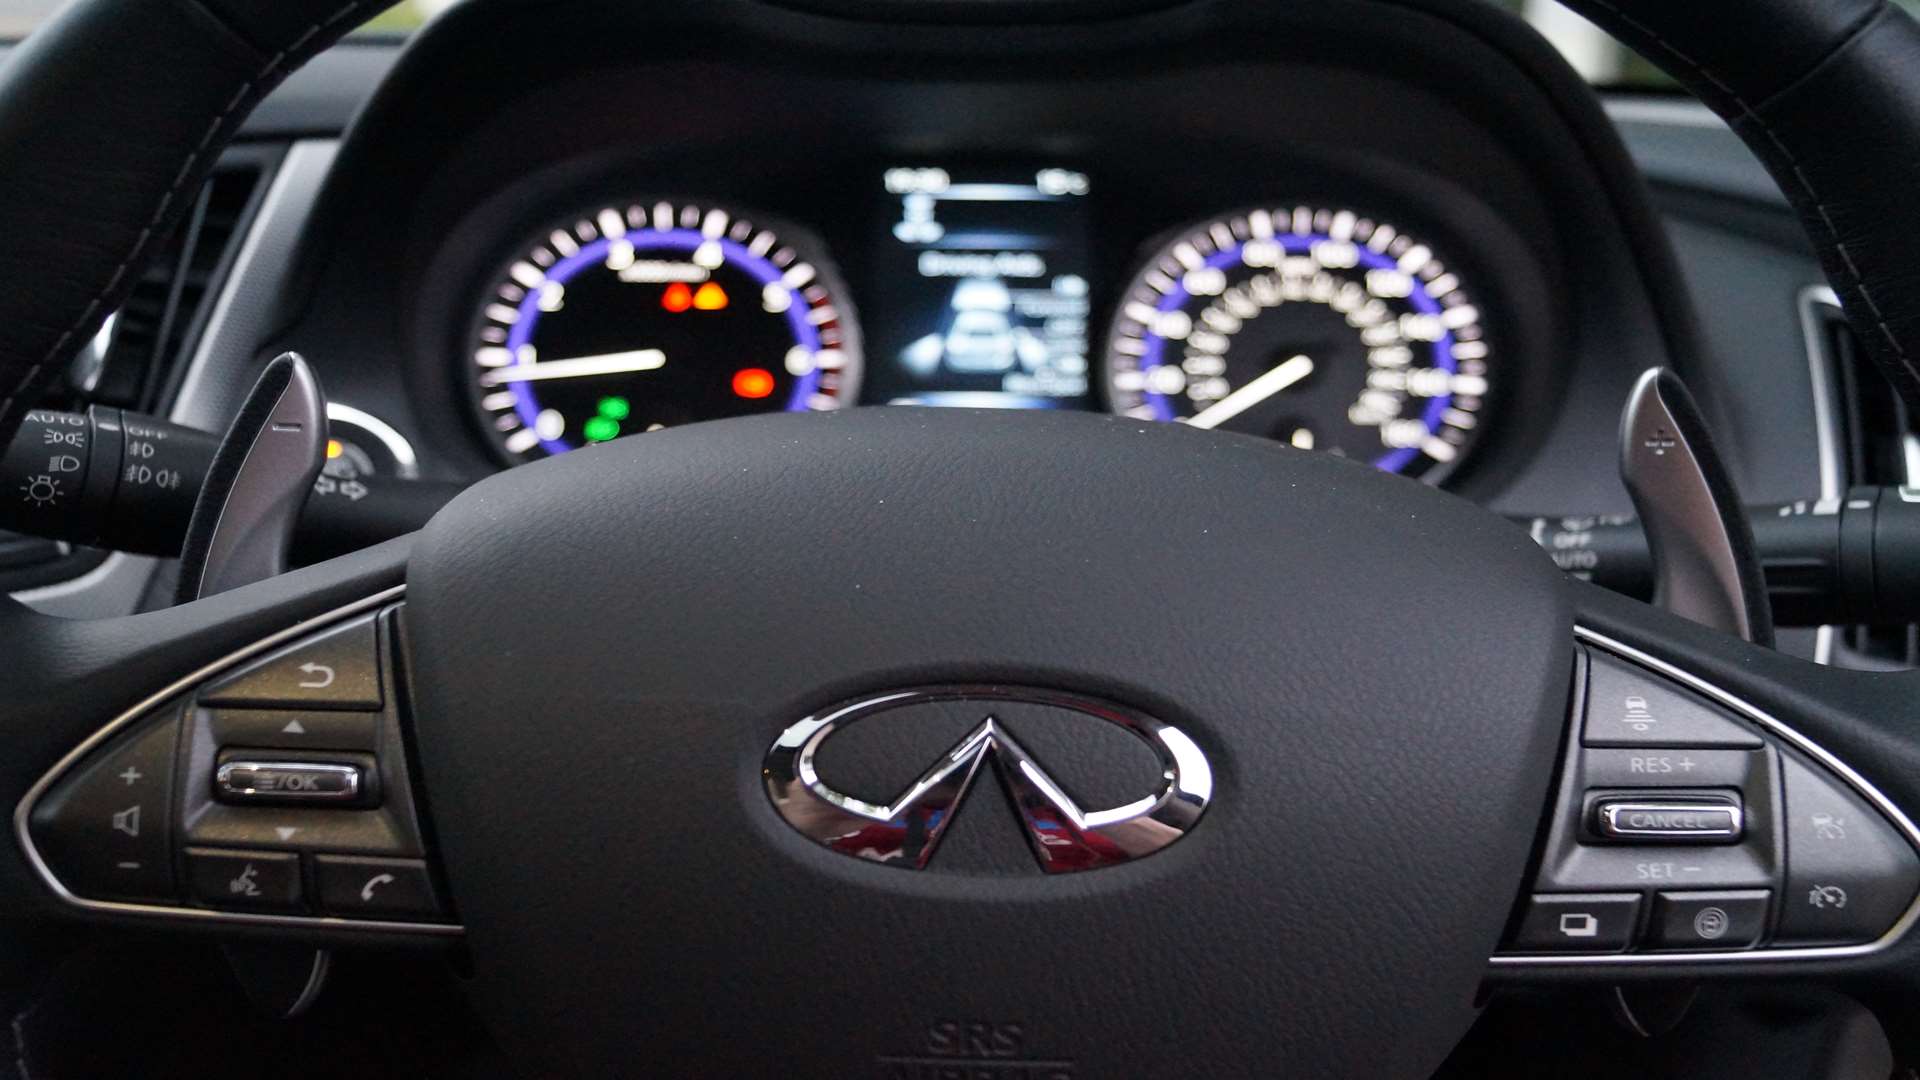 The Q50's steering is a drive-by-wire system